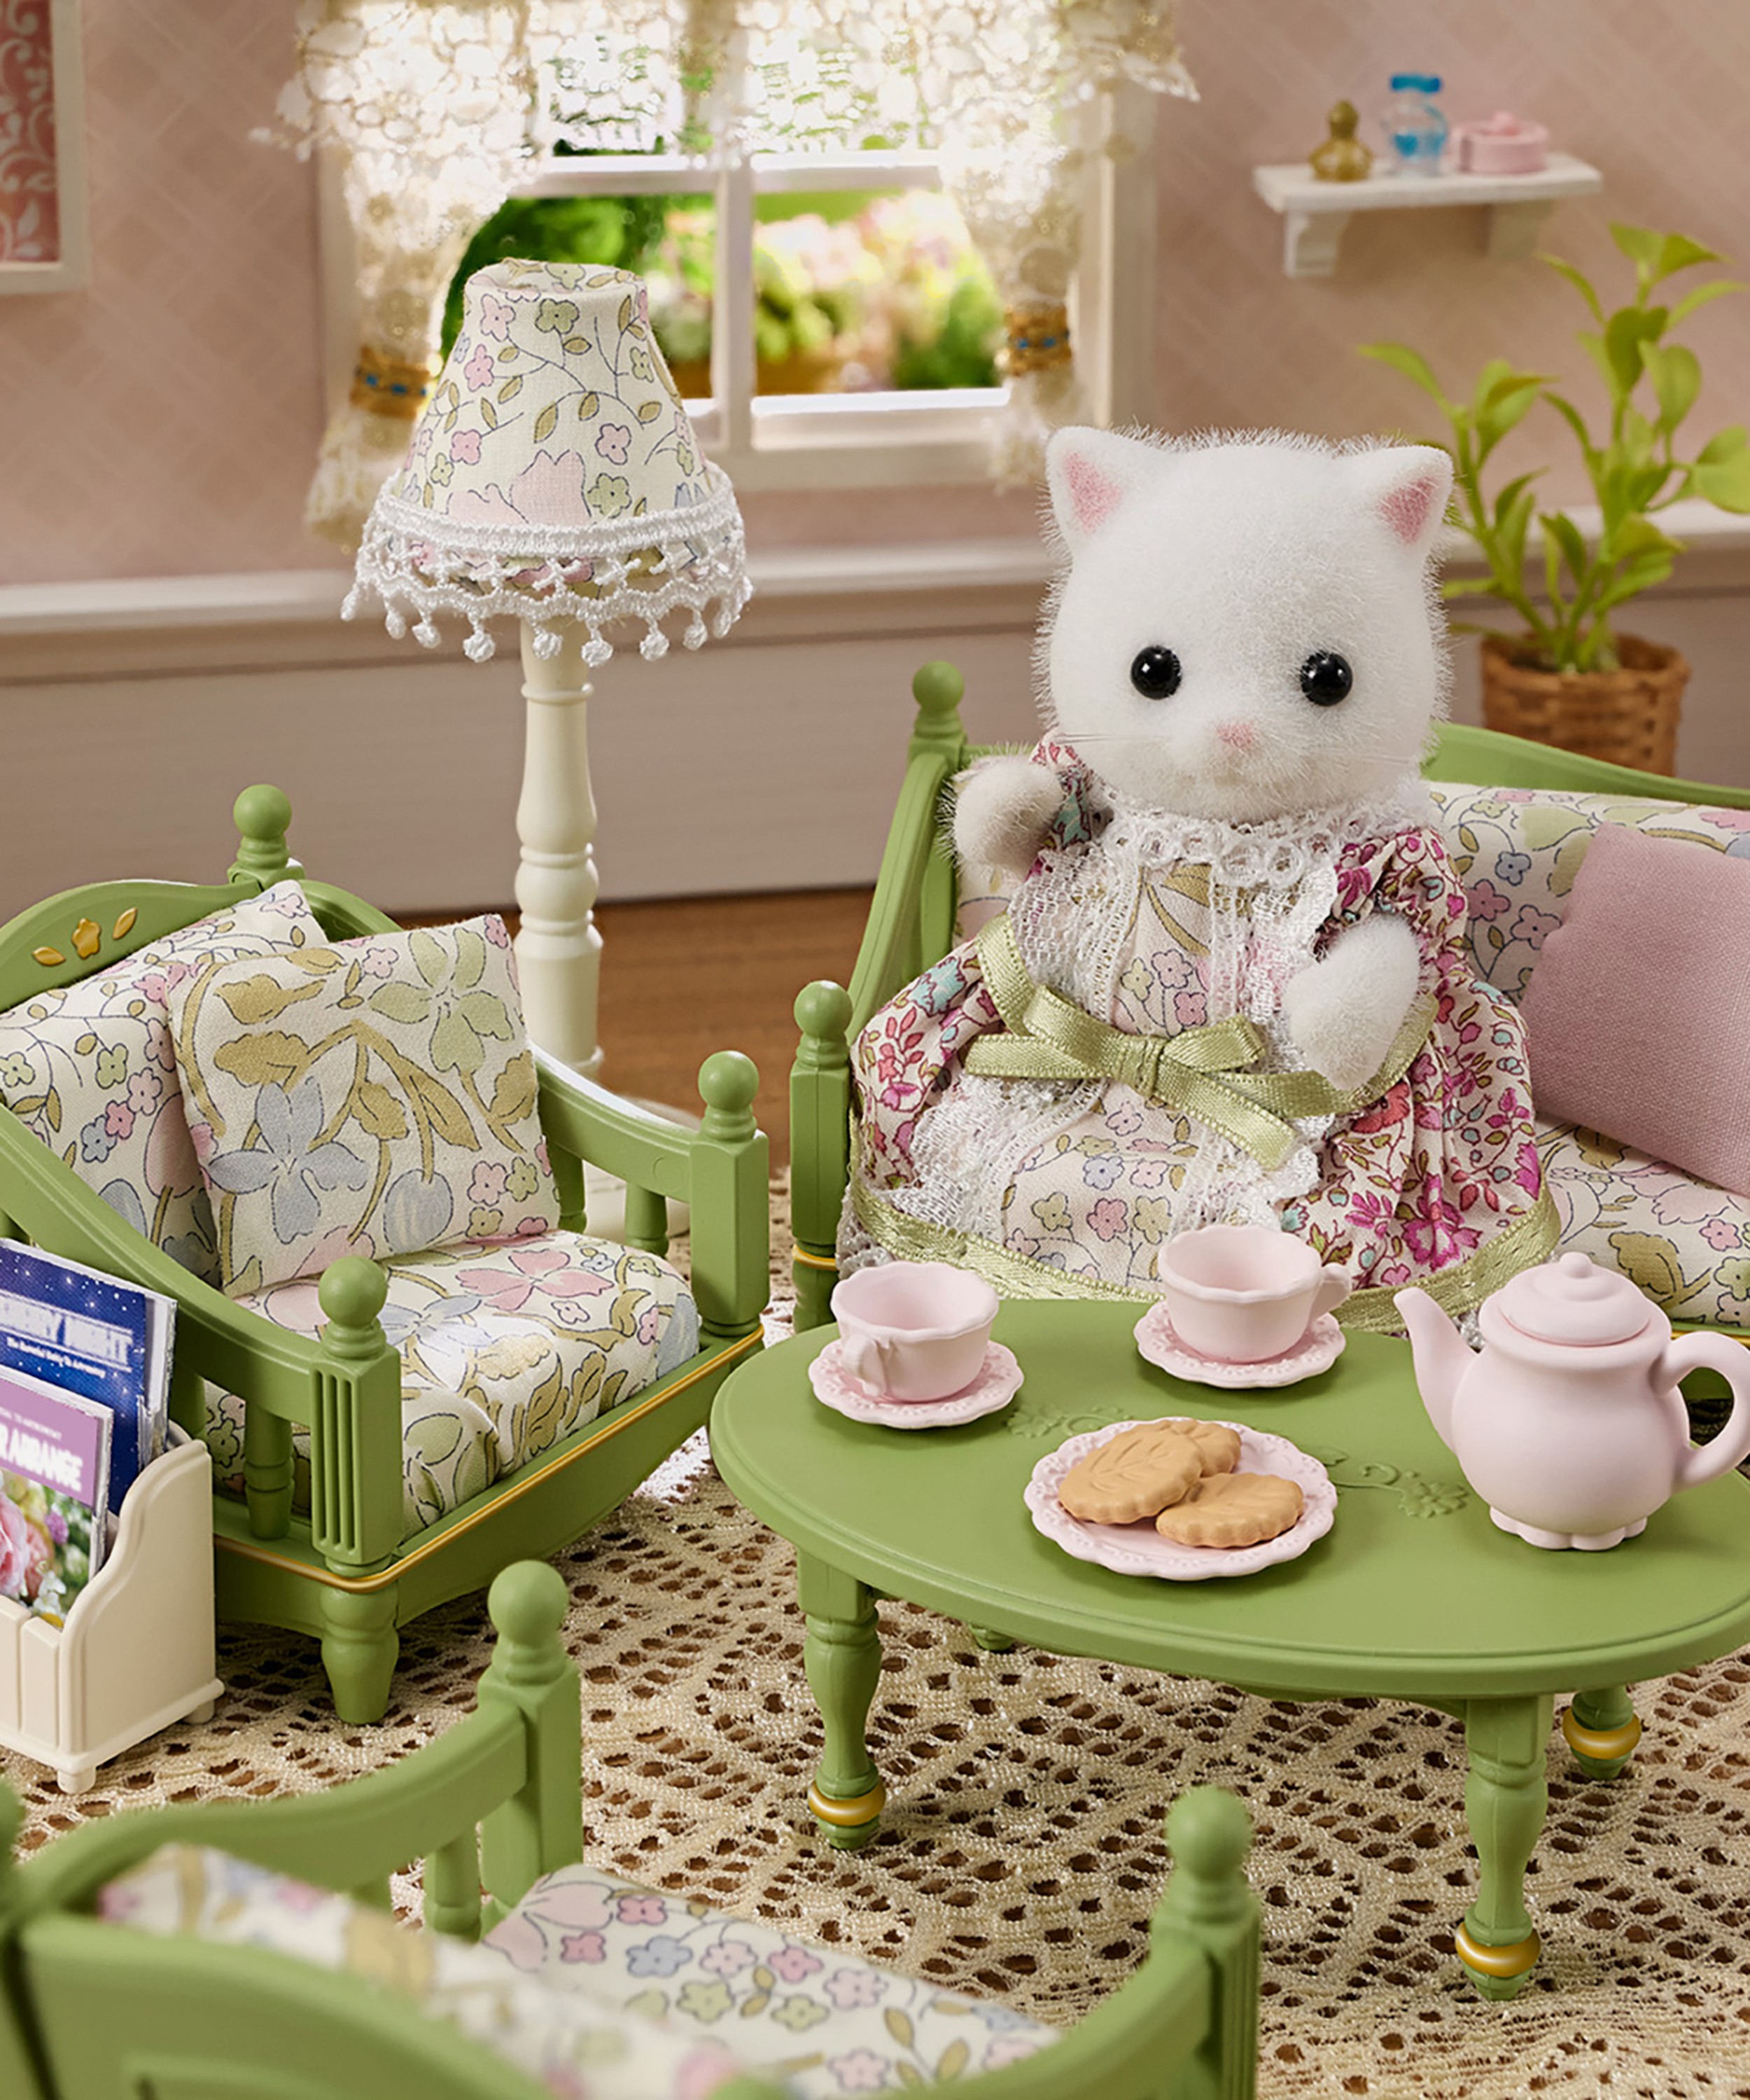 Where to buy Sylvanian Families in the UK